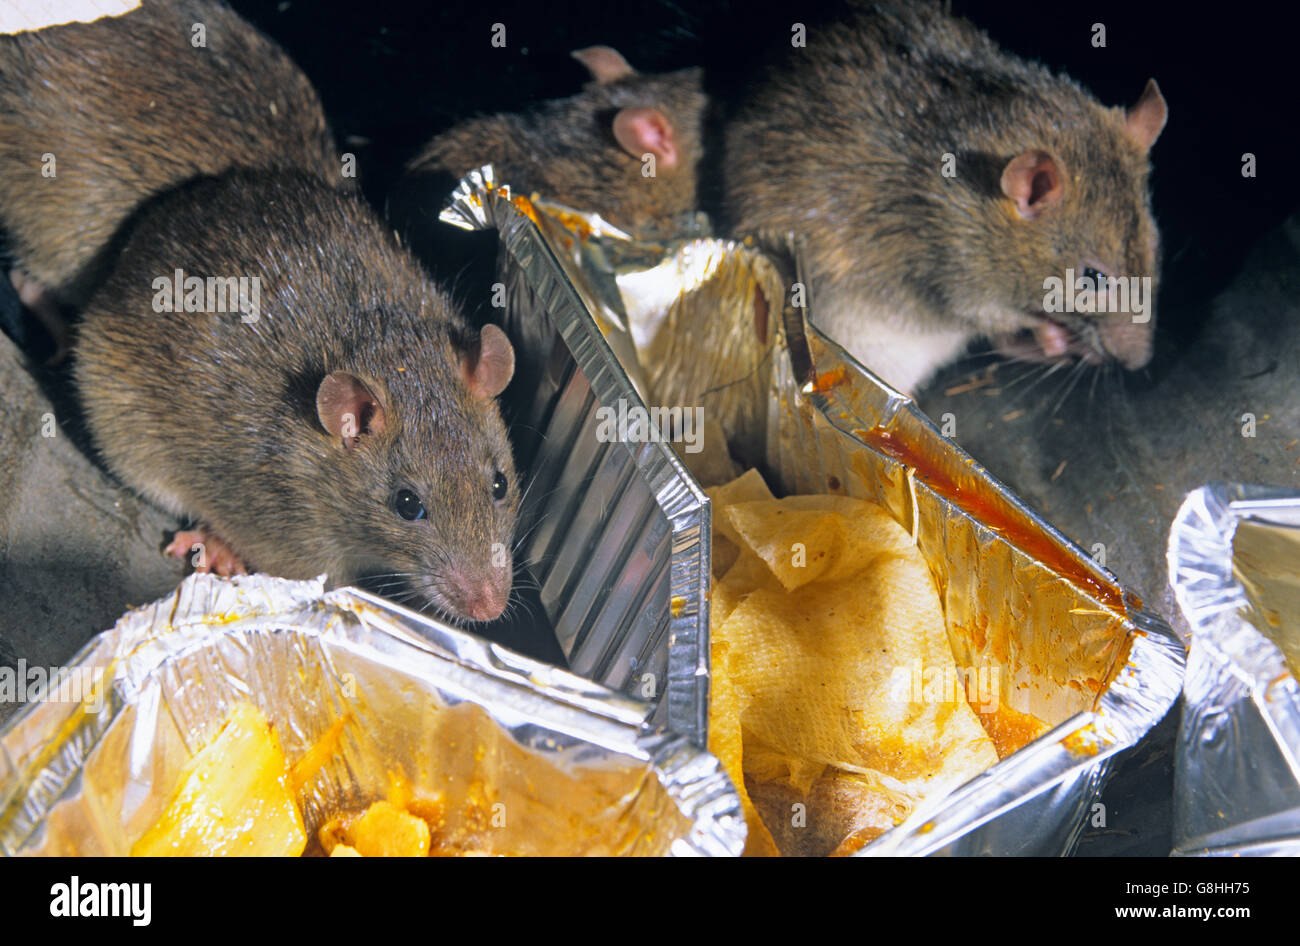 Brown rats Rattus norvegicus  taking advantage of discarded food near food take away outlet in urban environment Stock Photo